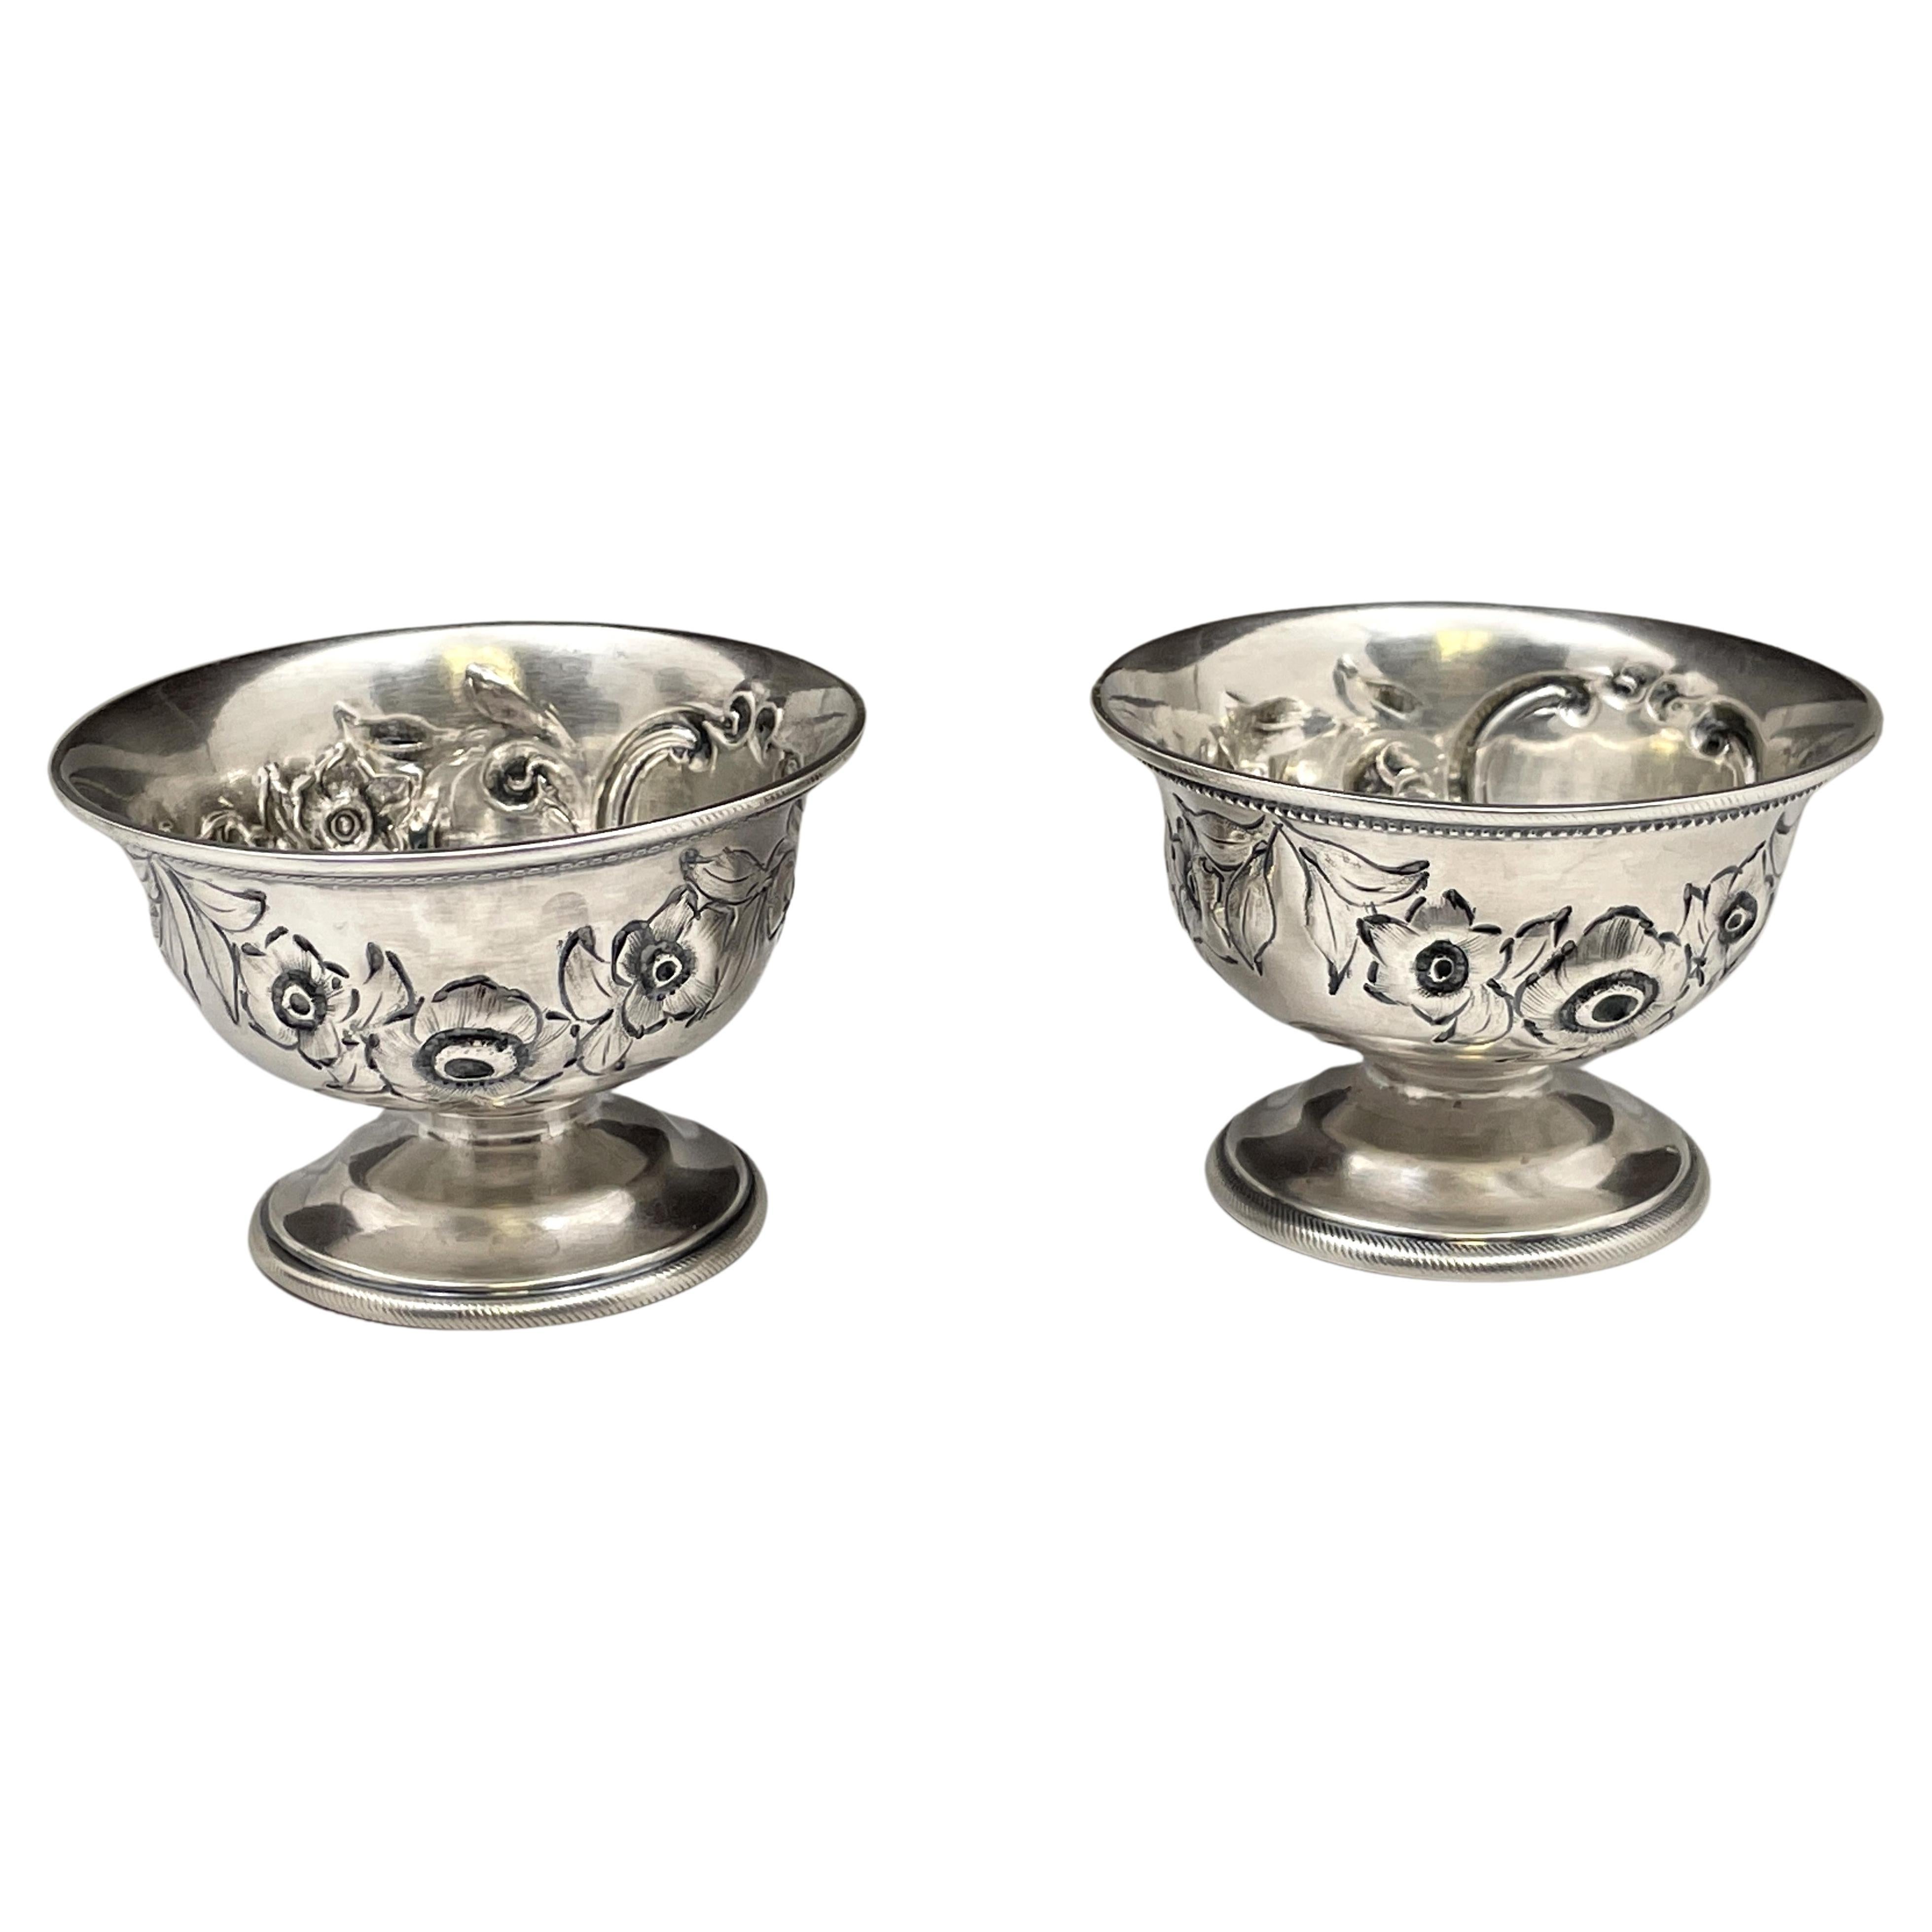 Gorham Coin Silver Pair of Open Salt Cellars from 1850s For Sale